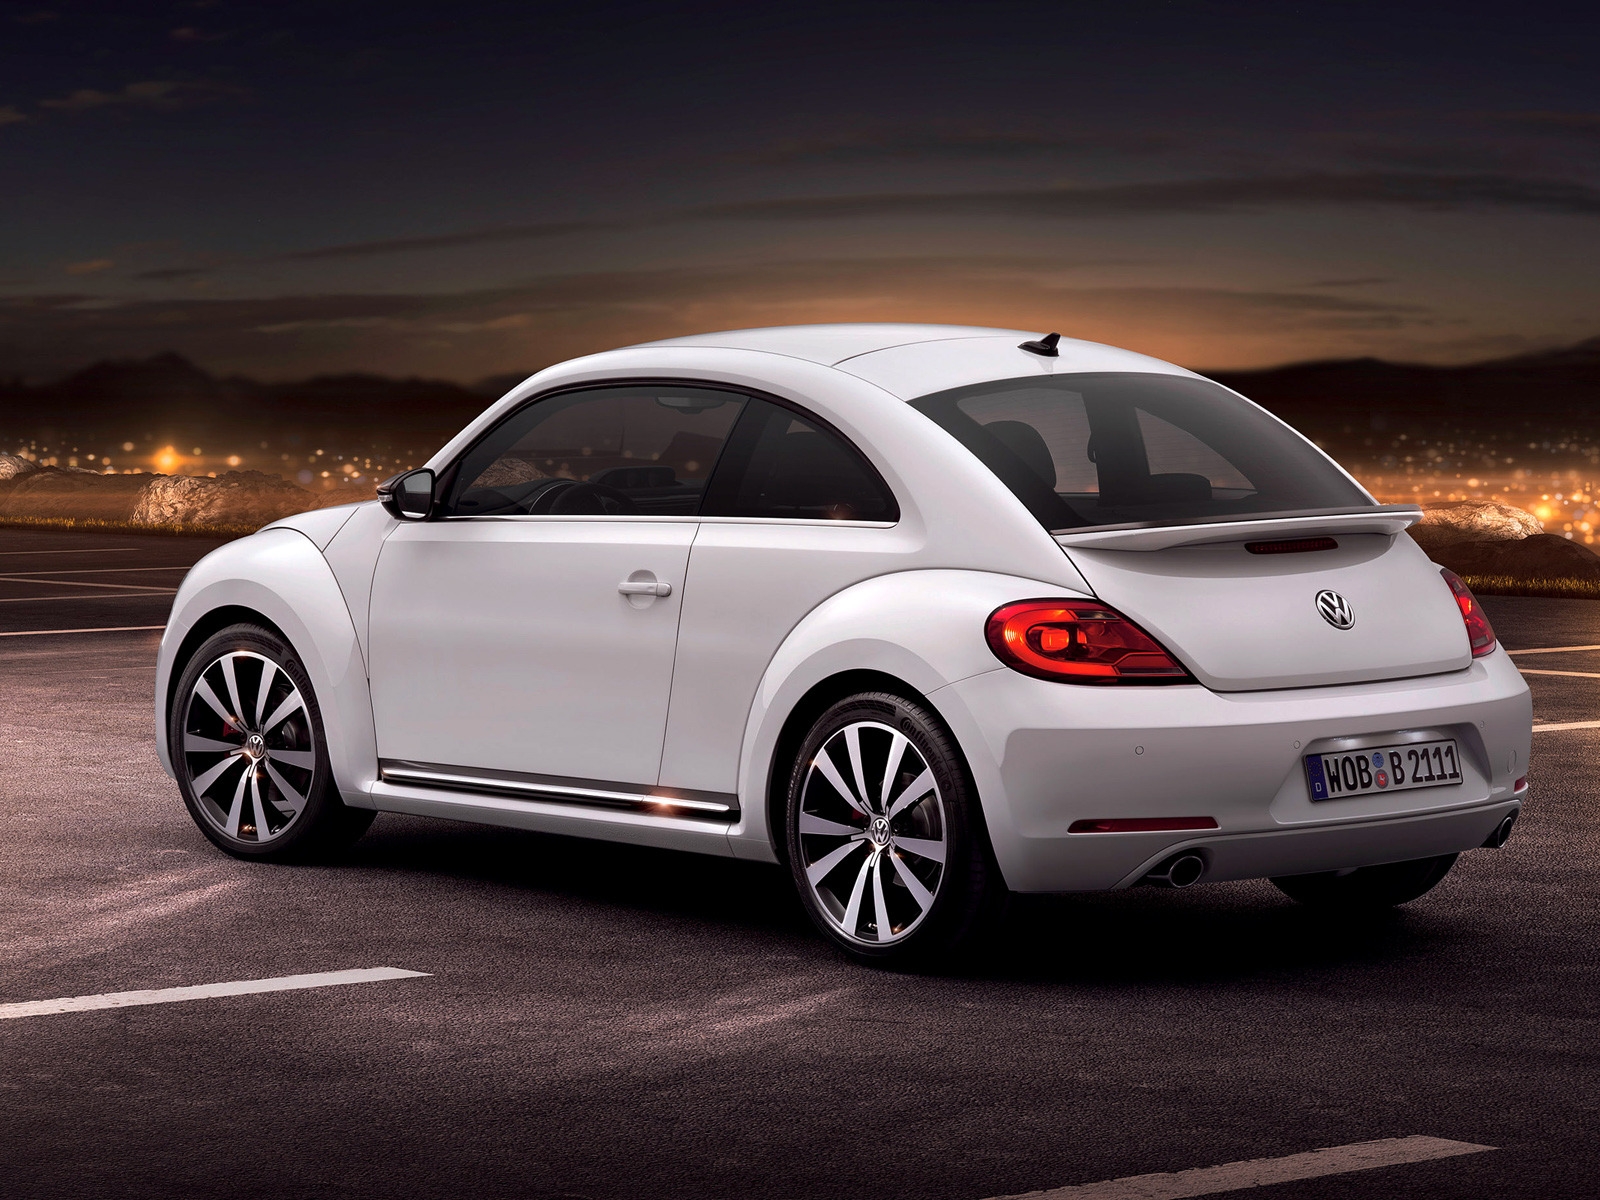 2012 VW Beetle for 1600 x 1200 resolution